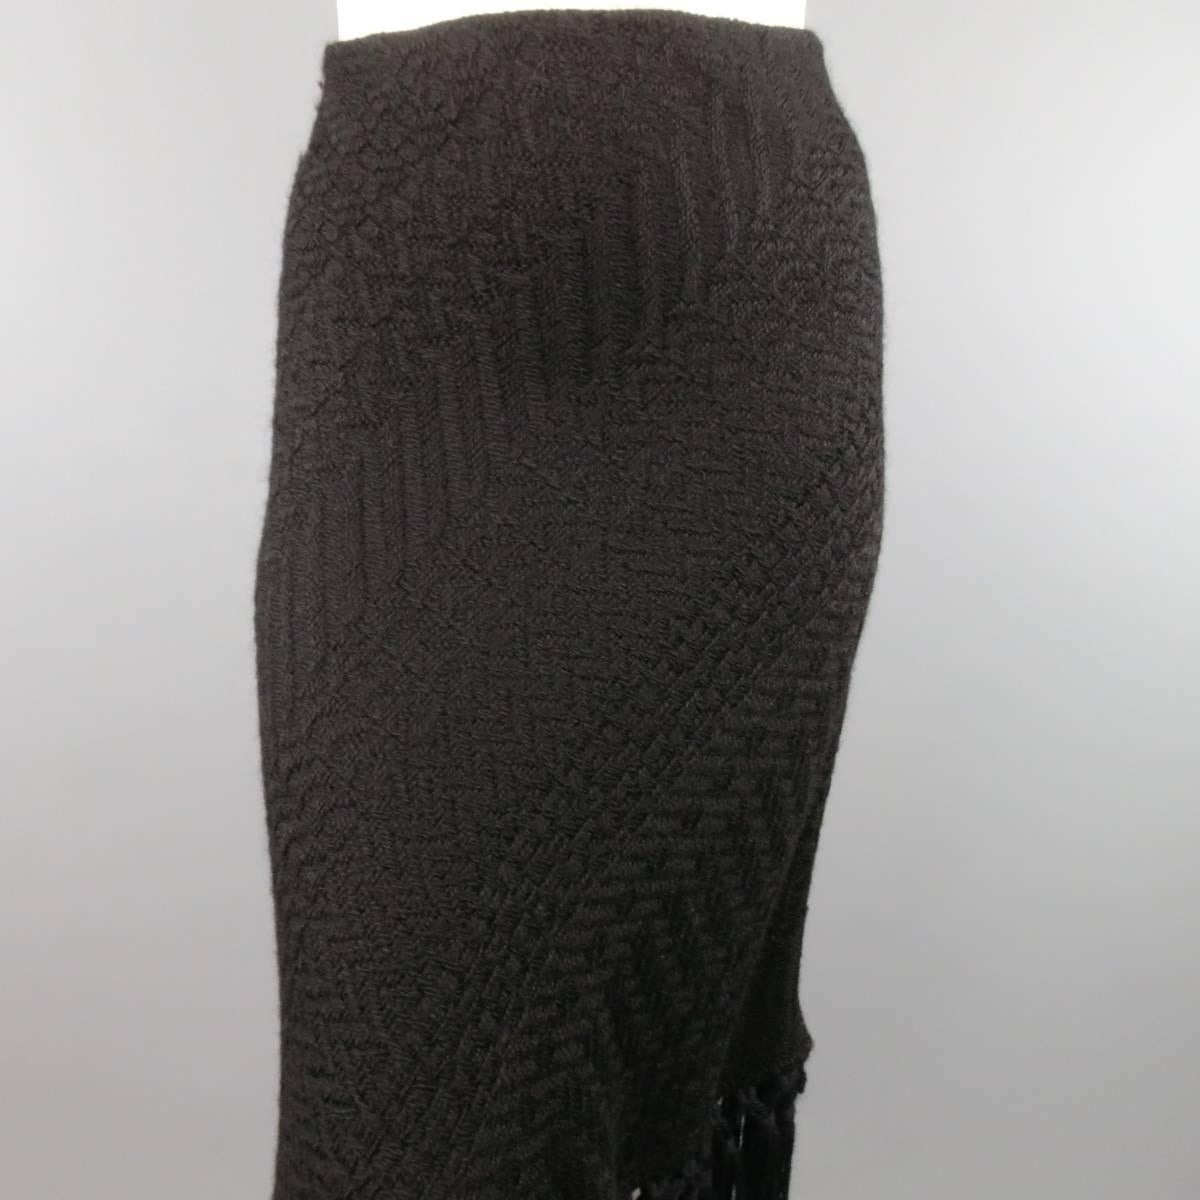 DOLCE & GABBANA winter skirt in a heavy textured wool fabric featuring an A line silhouette and tassel fringe trim. Silk lined. Made in Italy.
 
Excellent Pre-Owned Condition.
Marked: IT 48
 
Measurements:
 
Waist: 31 in.
Hip: 44 in.
Length